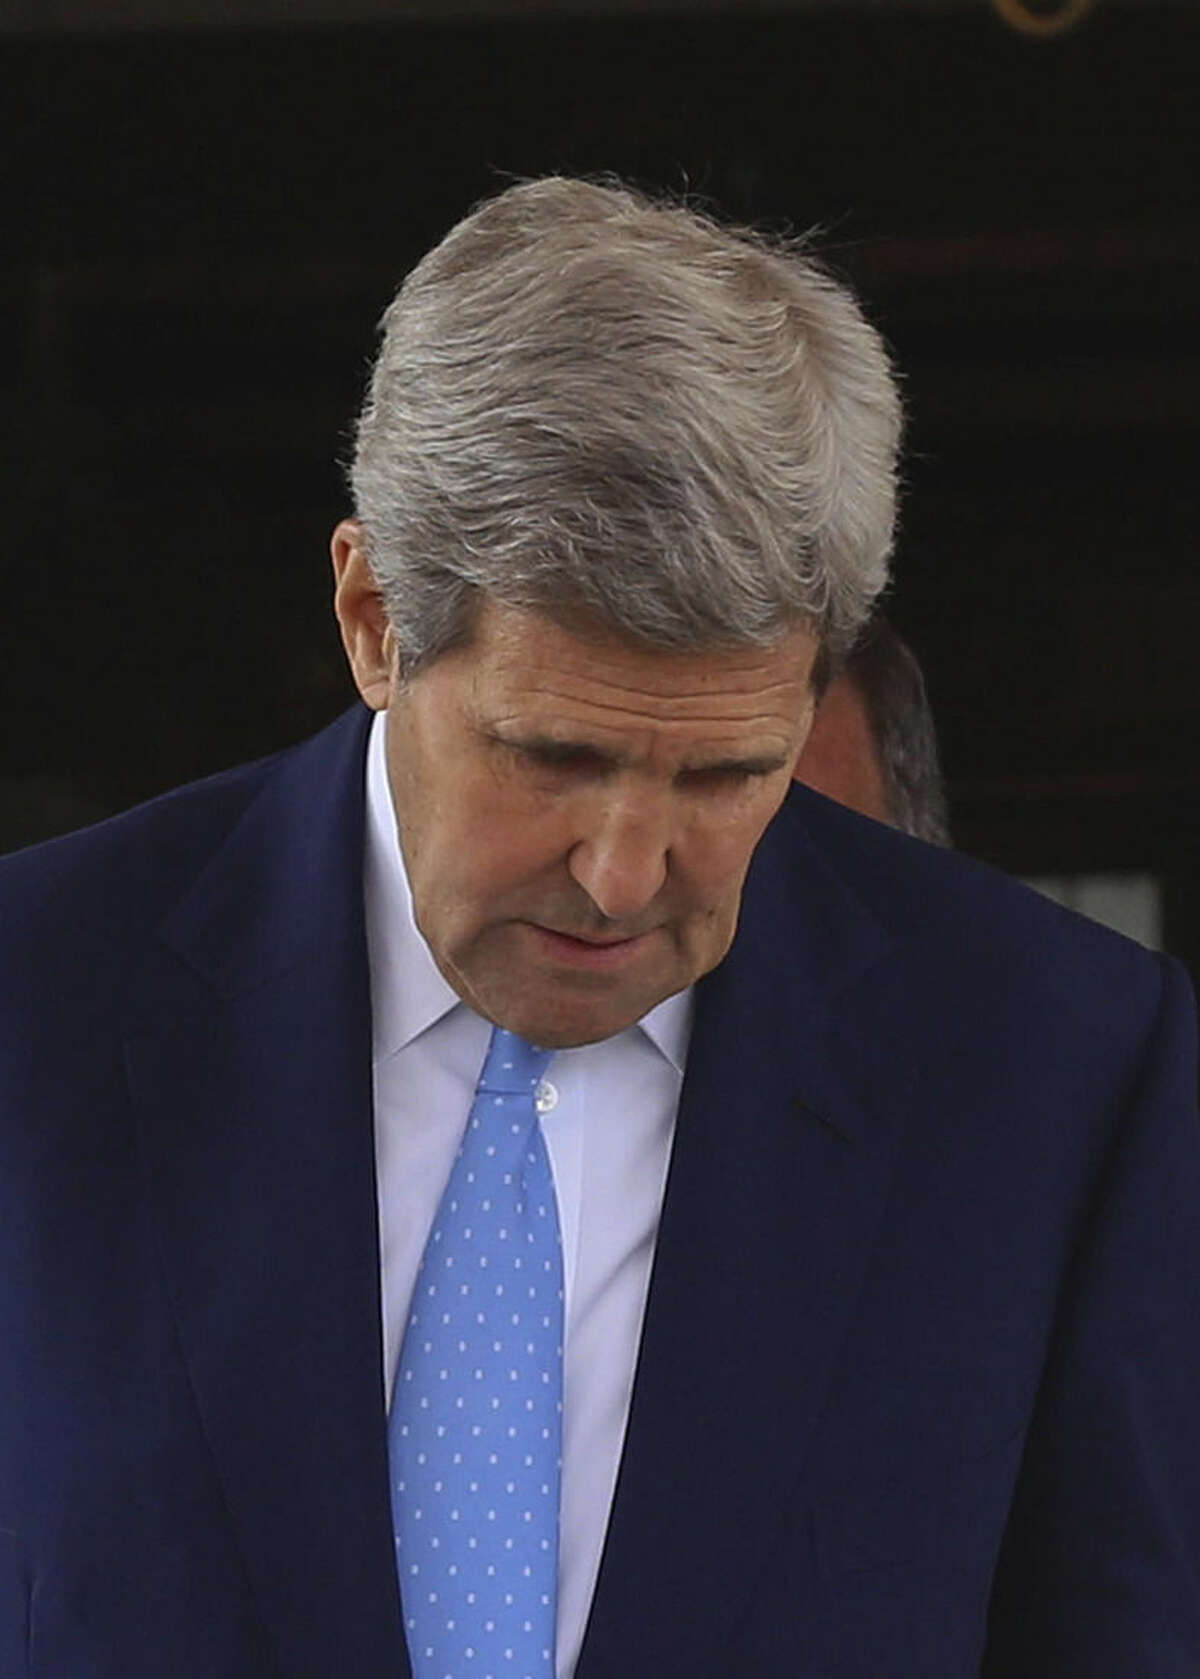 U.S. Secretary of State John Kerry leaves after a meeting with Palestinian President Mahmoud Abbas, in Amman, Jordan October 24, 2015. Kerry said Saturday that Israel and Jordan have agreed on steps aimed at reducing tensions at a holy site in Jerusalem that have fanned Israeli-Palestinian violence. (AP Photo/Raad Adayleh)